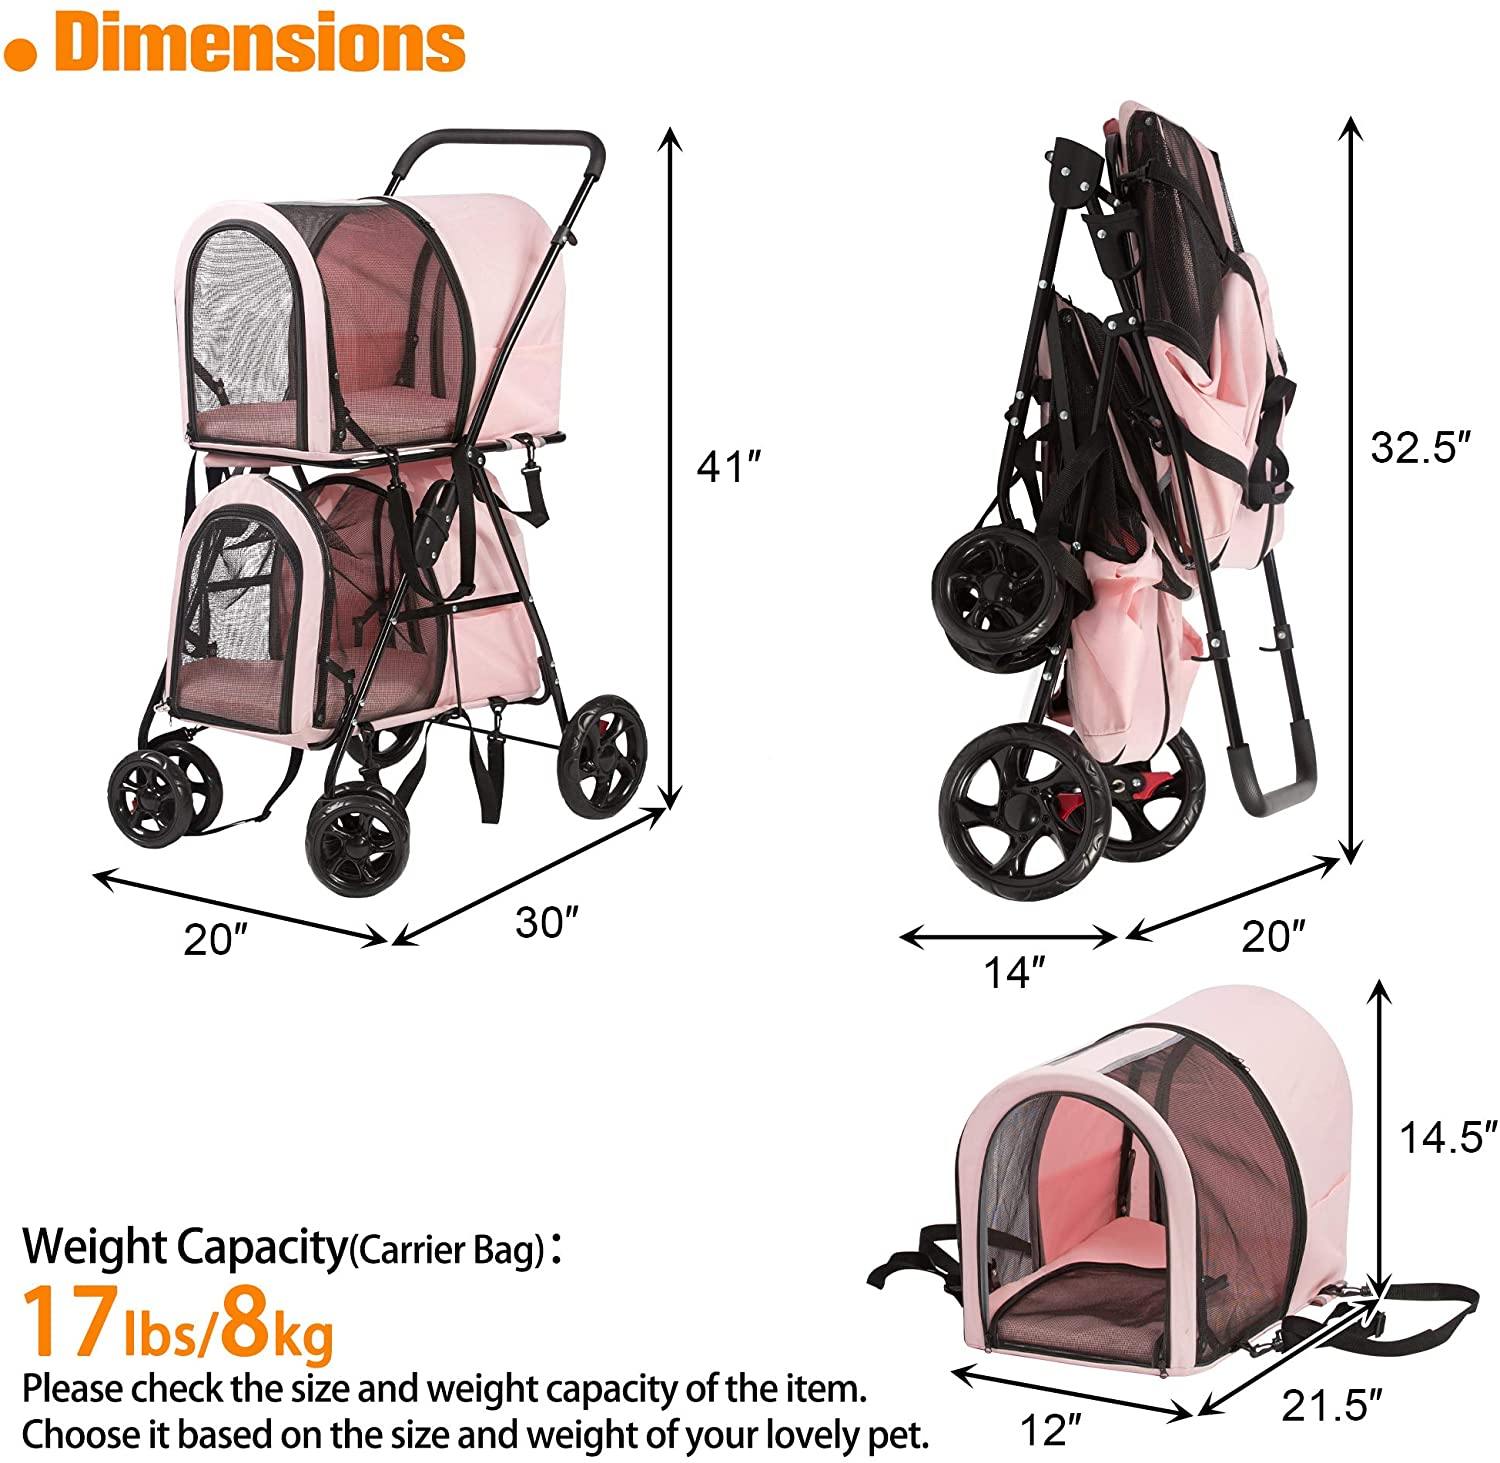 Foldable Pet Stroller, Double Decker Stroller Folding Portable Jogging Travel Carrier Cage for Small Medium Dogs and Cats (Pink) - Bosonshop